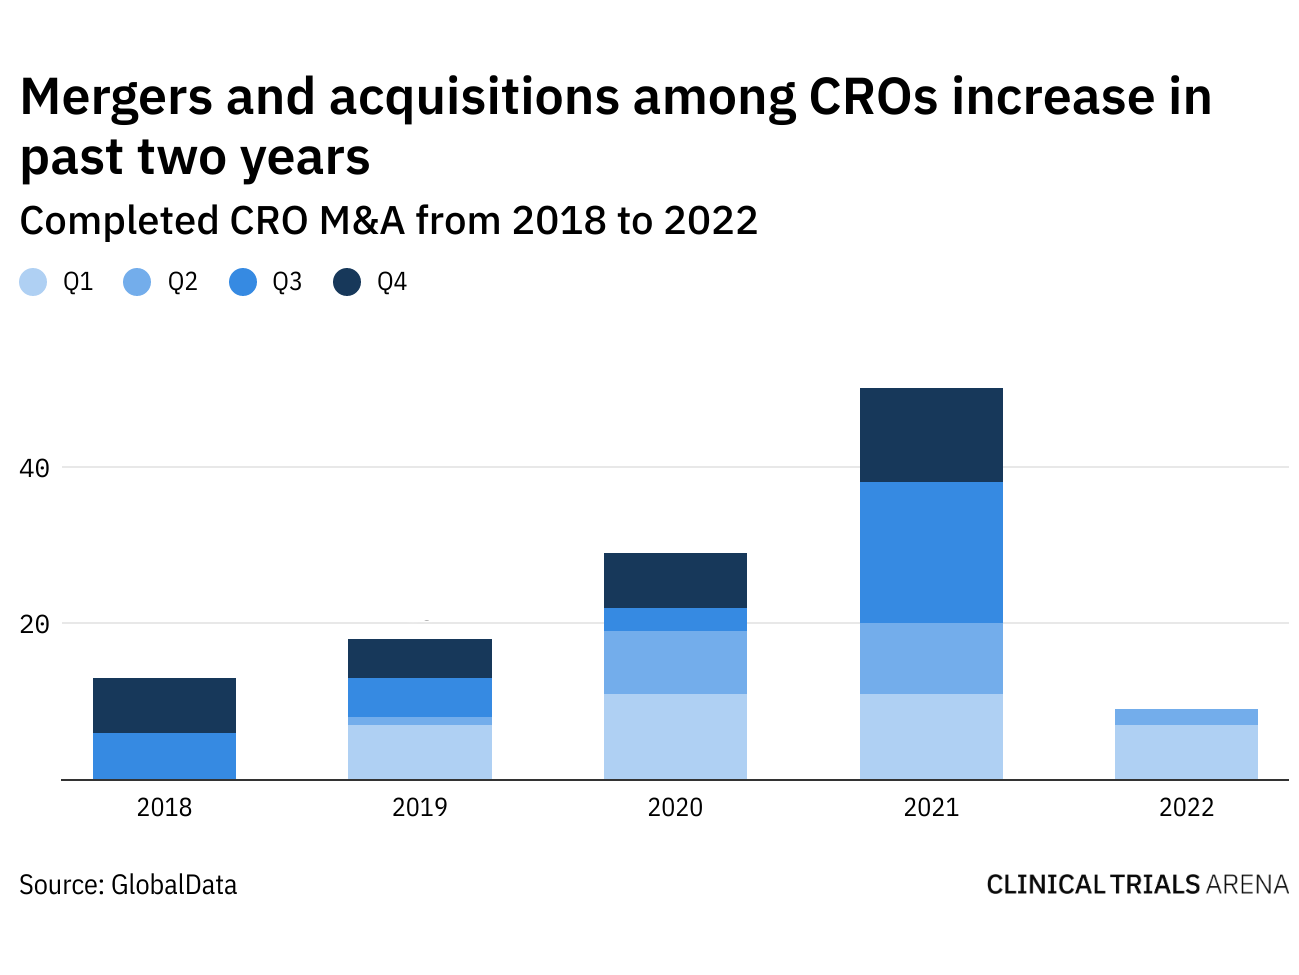 CRO M&A deals reach new record, but what does this mean for clinical trial sponsors?